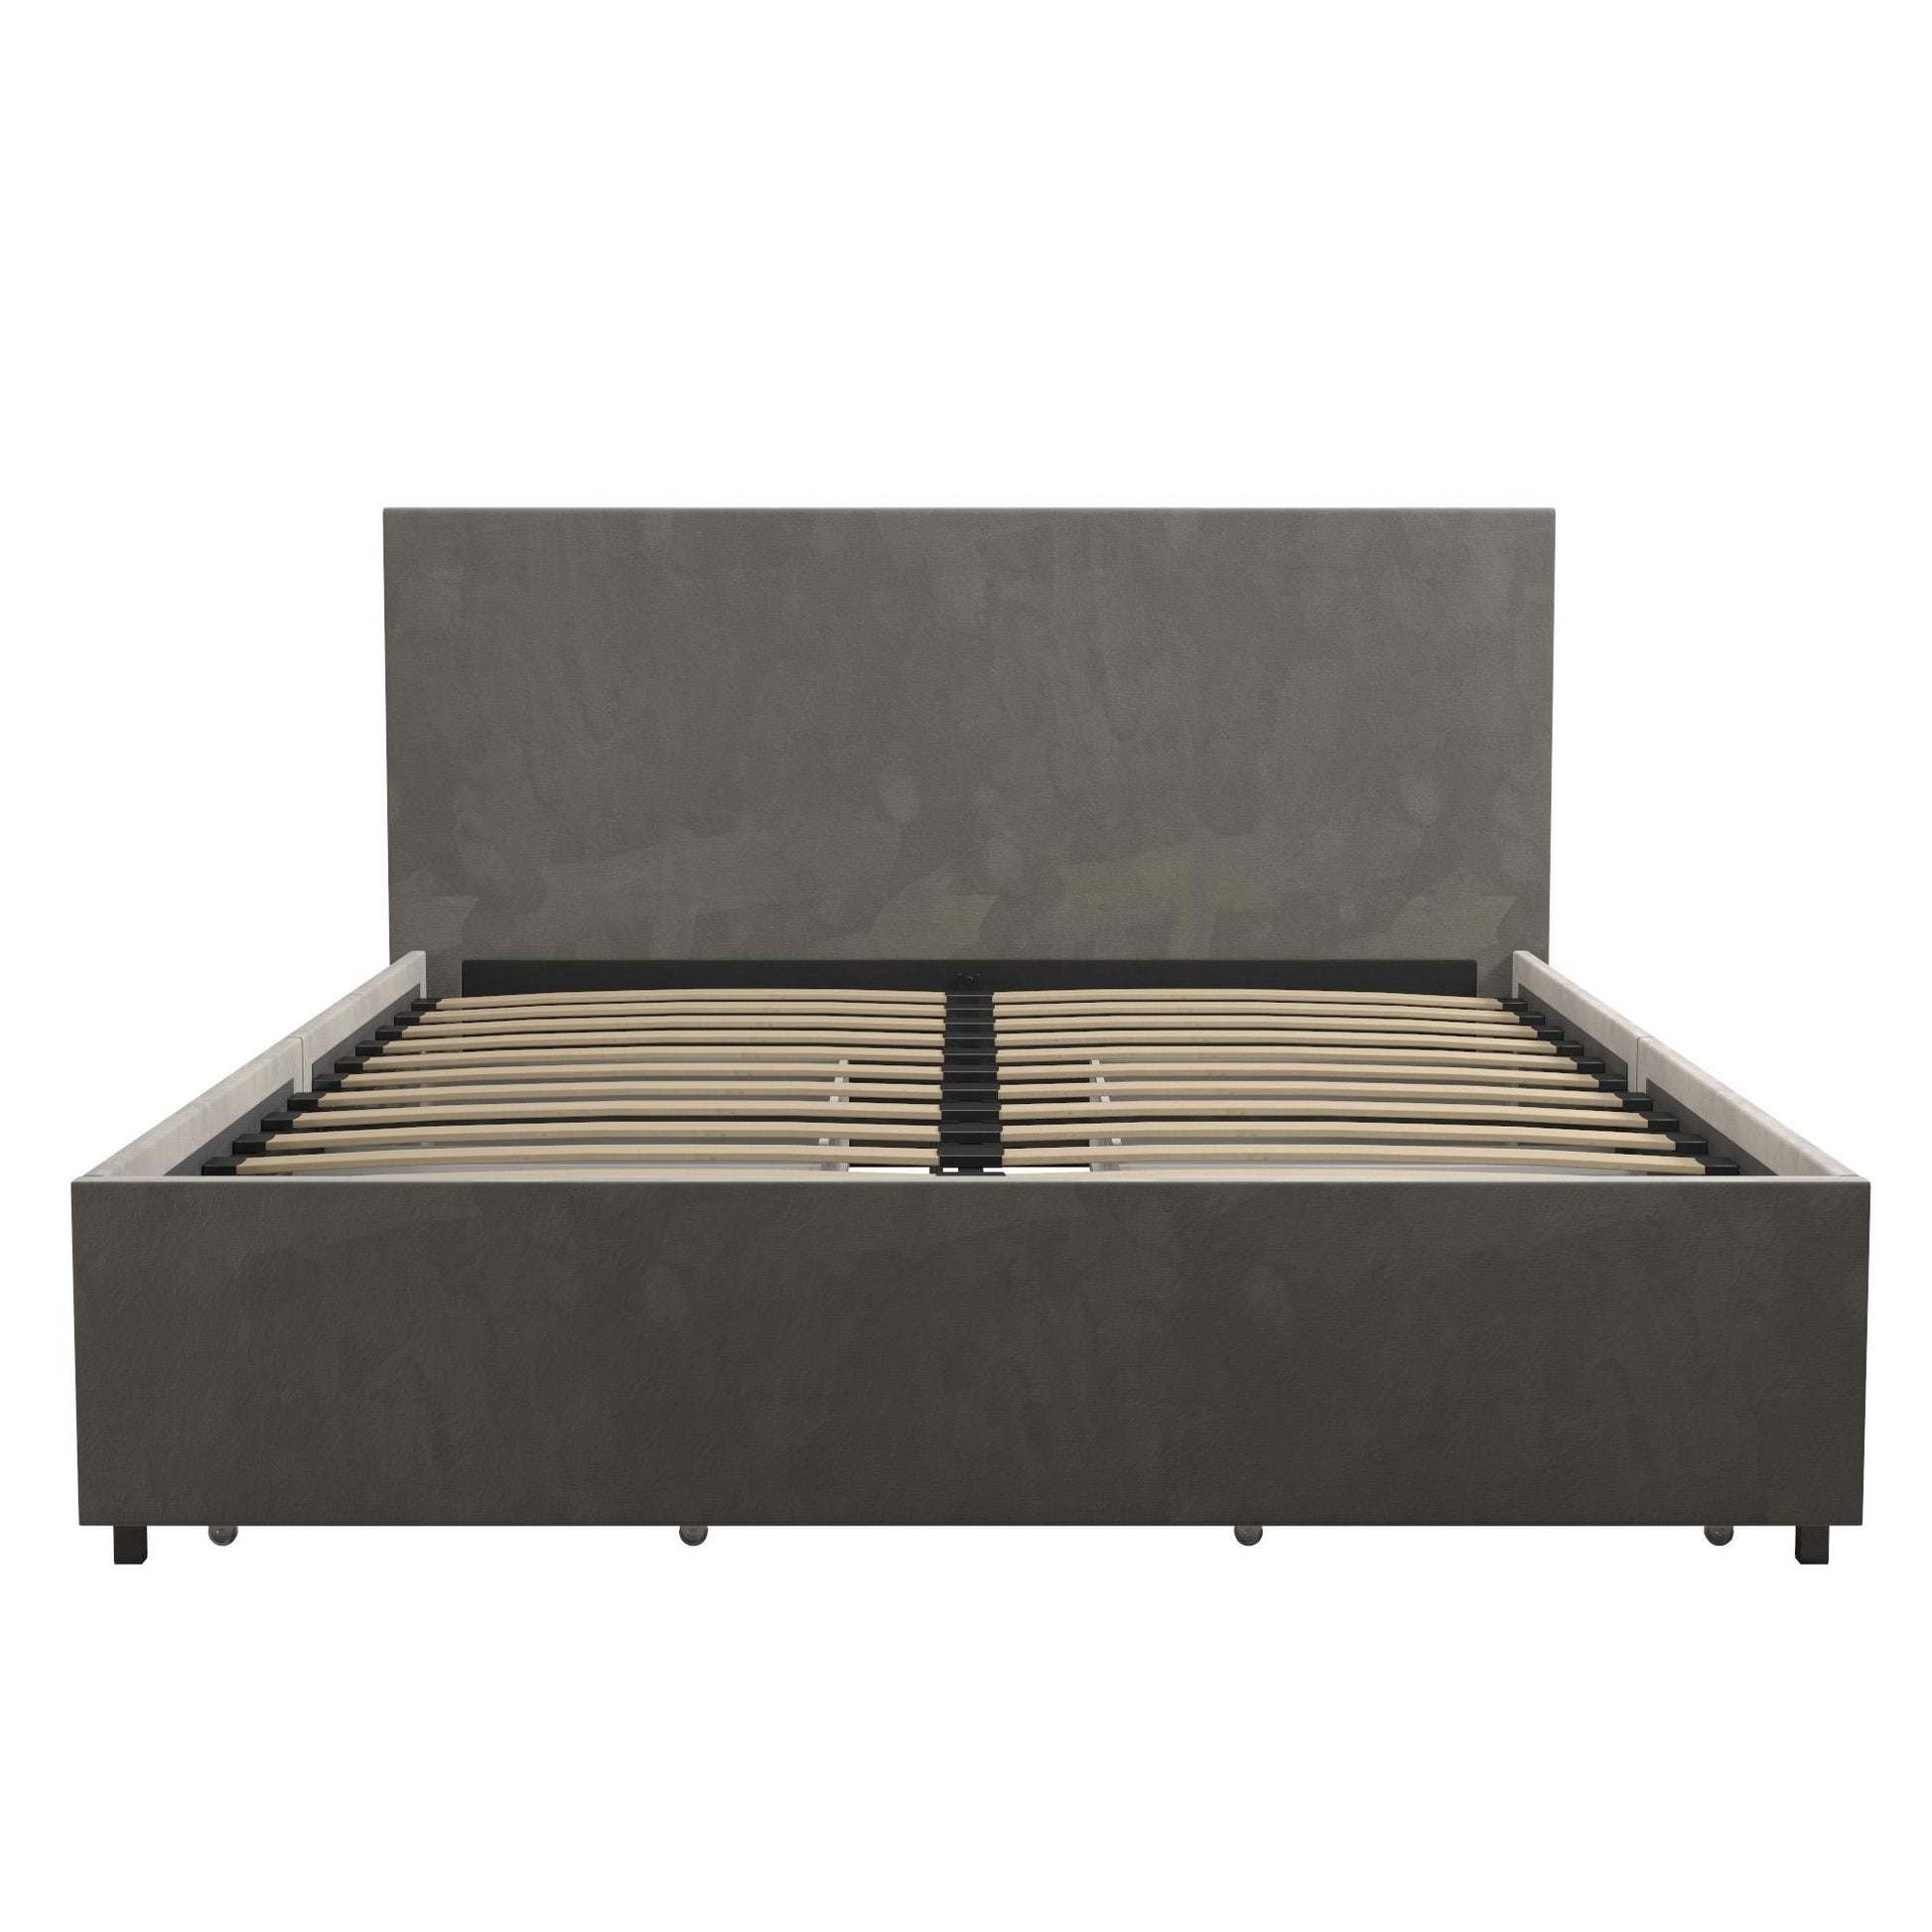 Kelly Upholstered Bed with Storage Drawers - Light Gray - Full